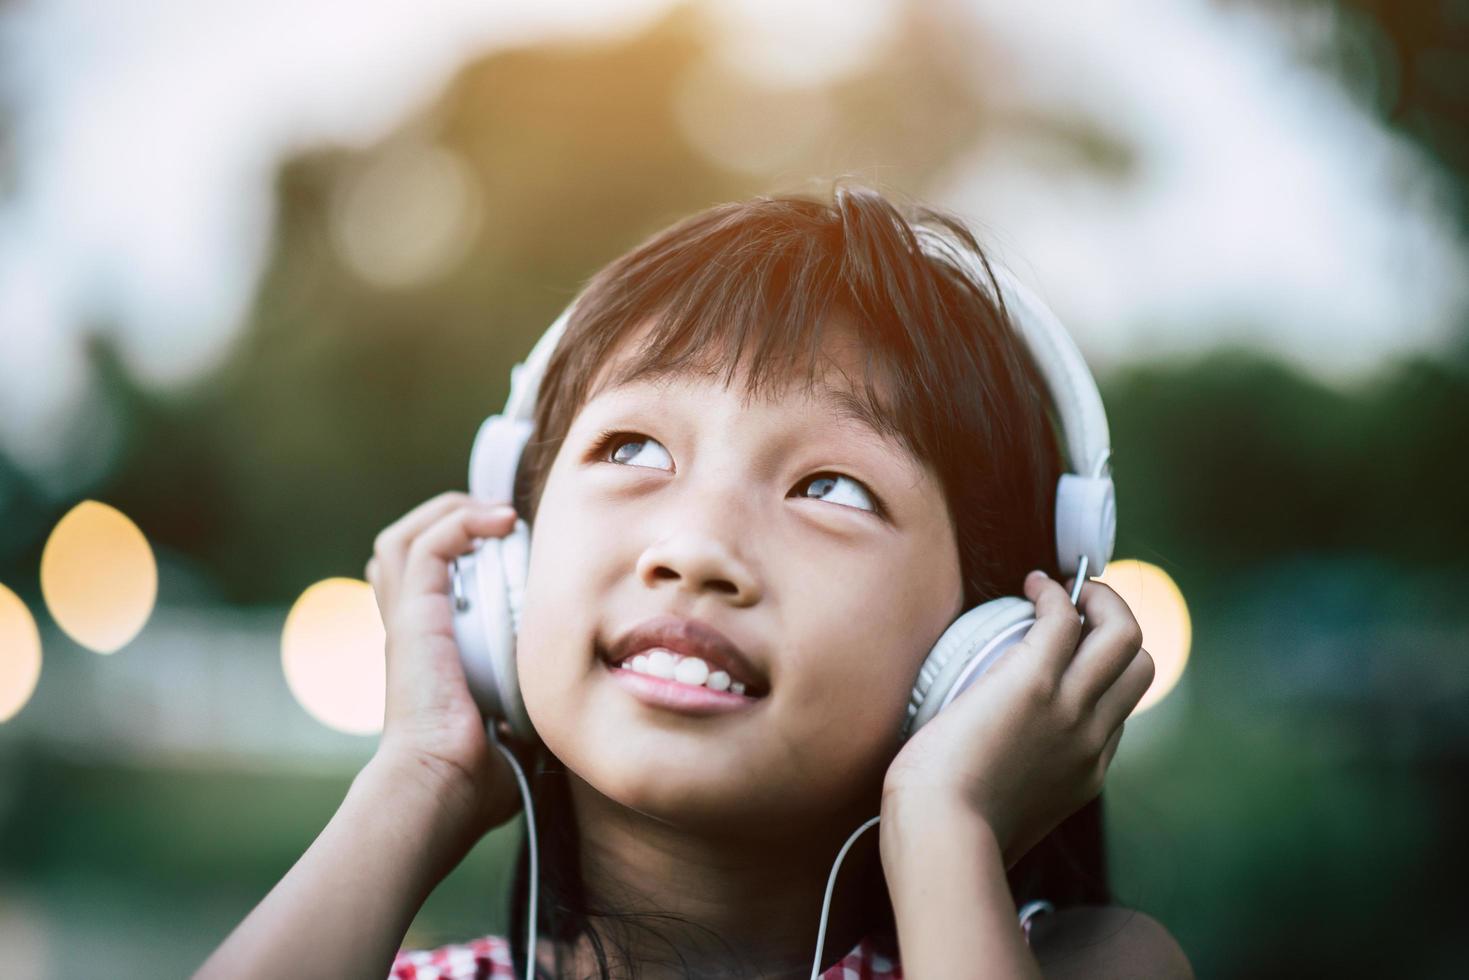 Little girl listening to music in the park with headphones photo